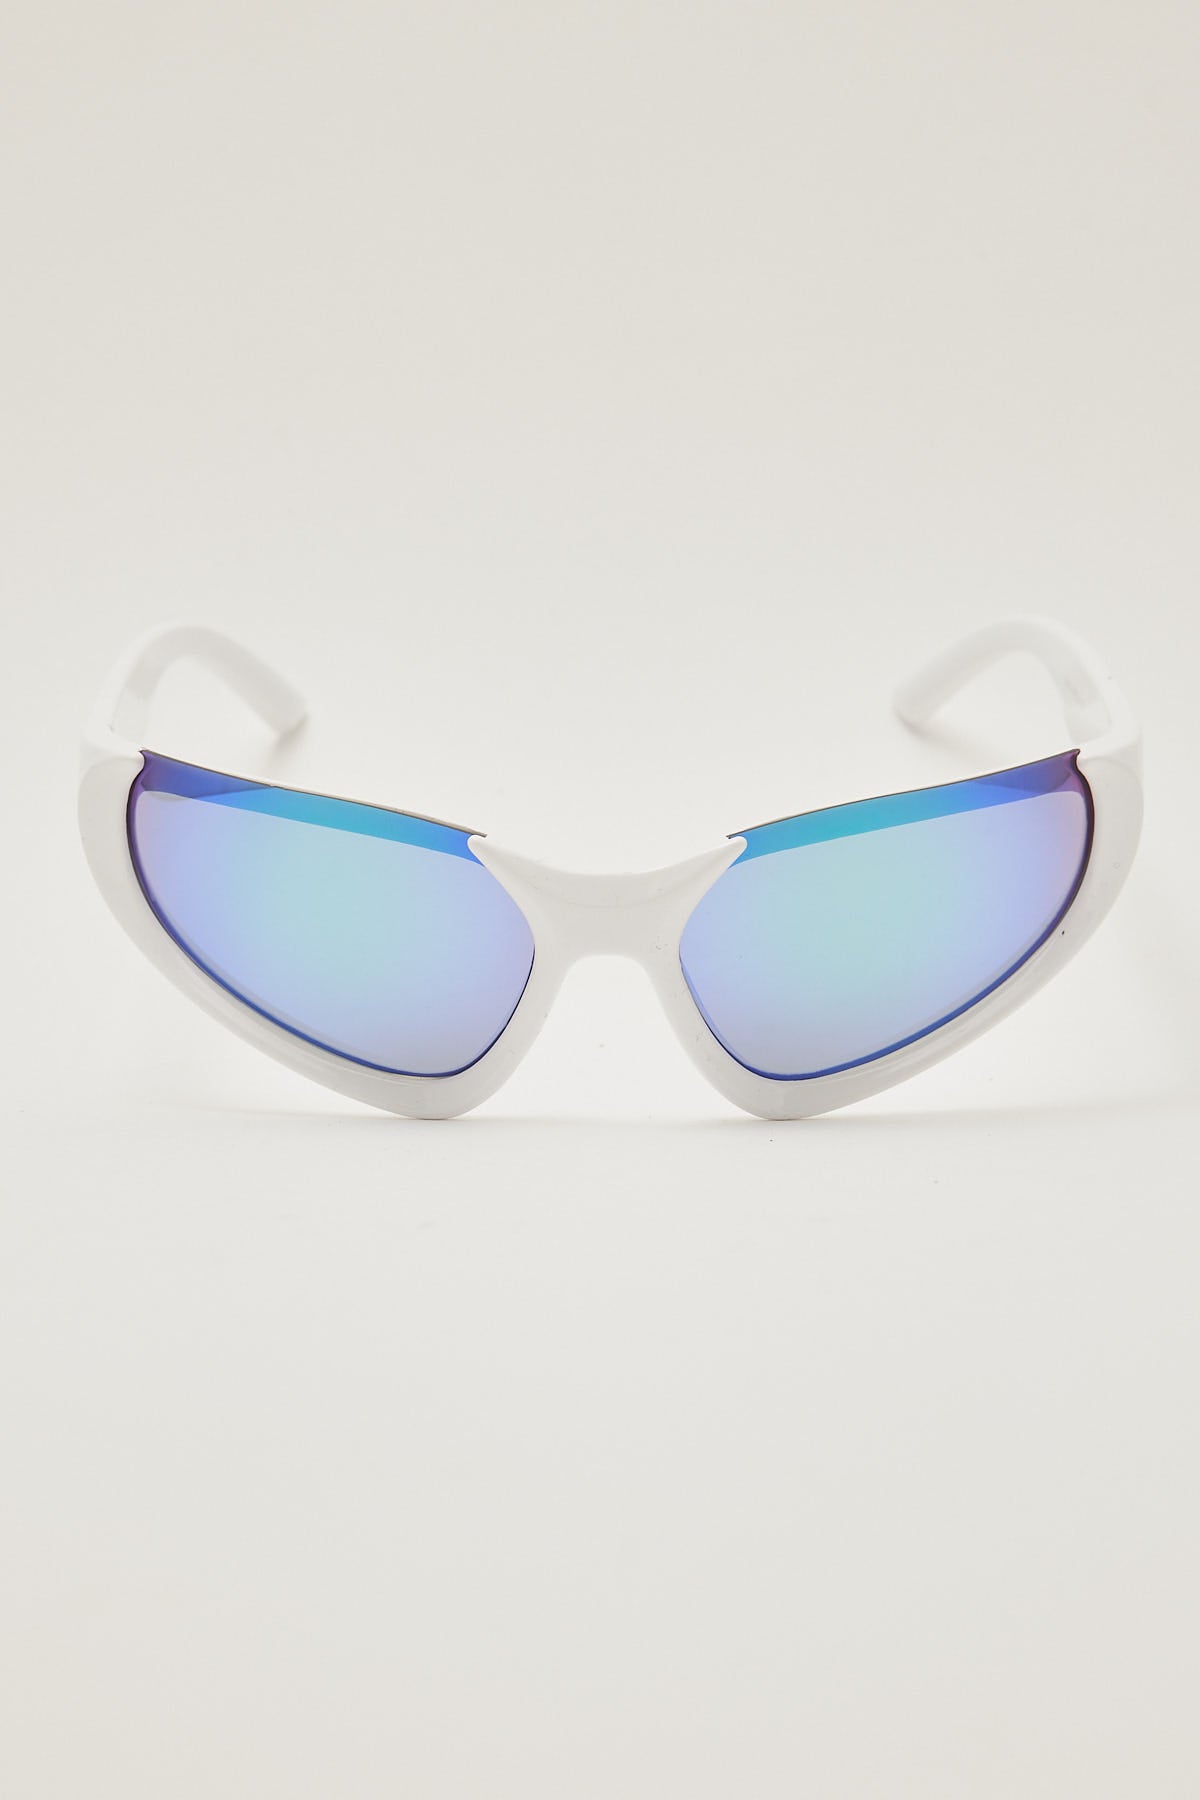 Angels Whisper Frosted Sunglasses Multi